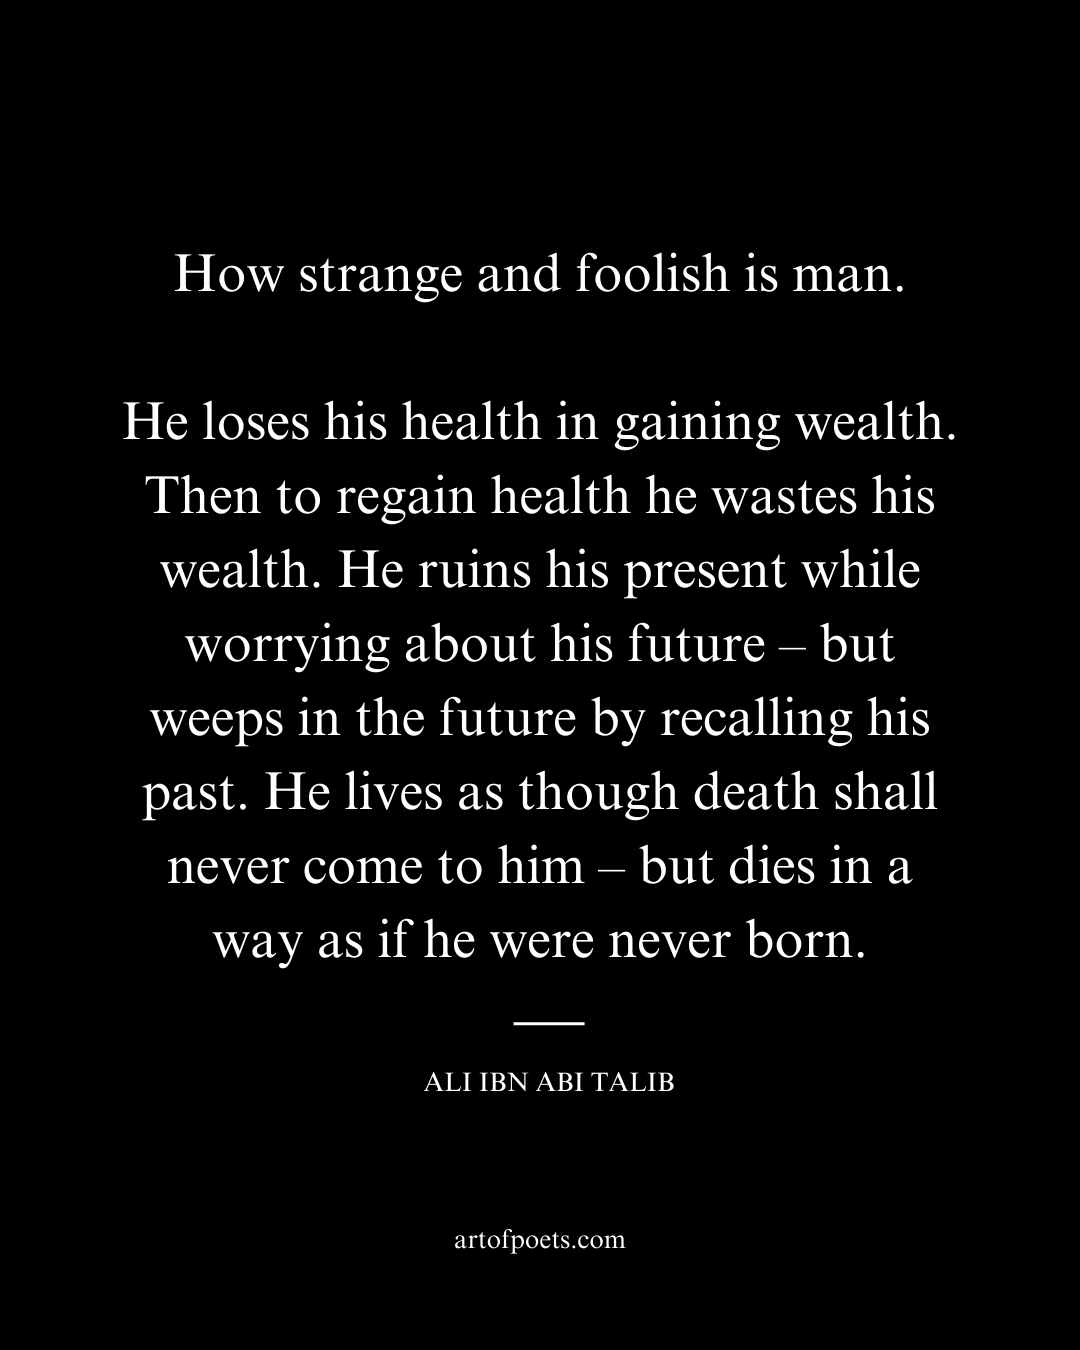 How strange and foolish is man. He loses his health in gaining wealth. Then to regain health he wastes his wealth.